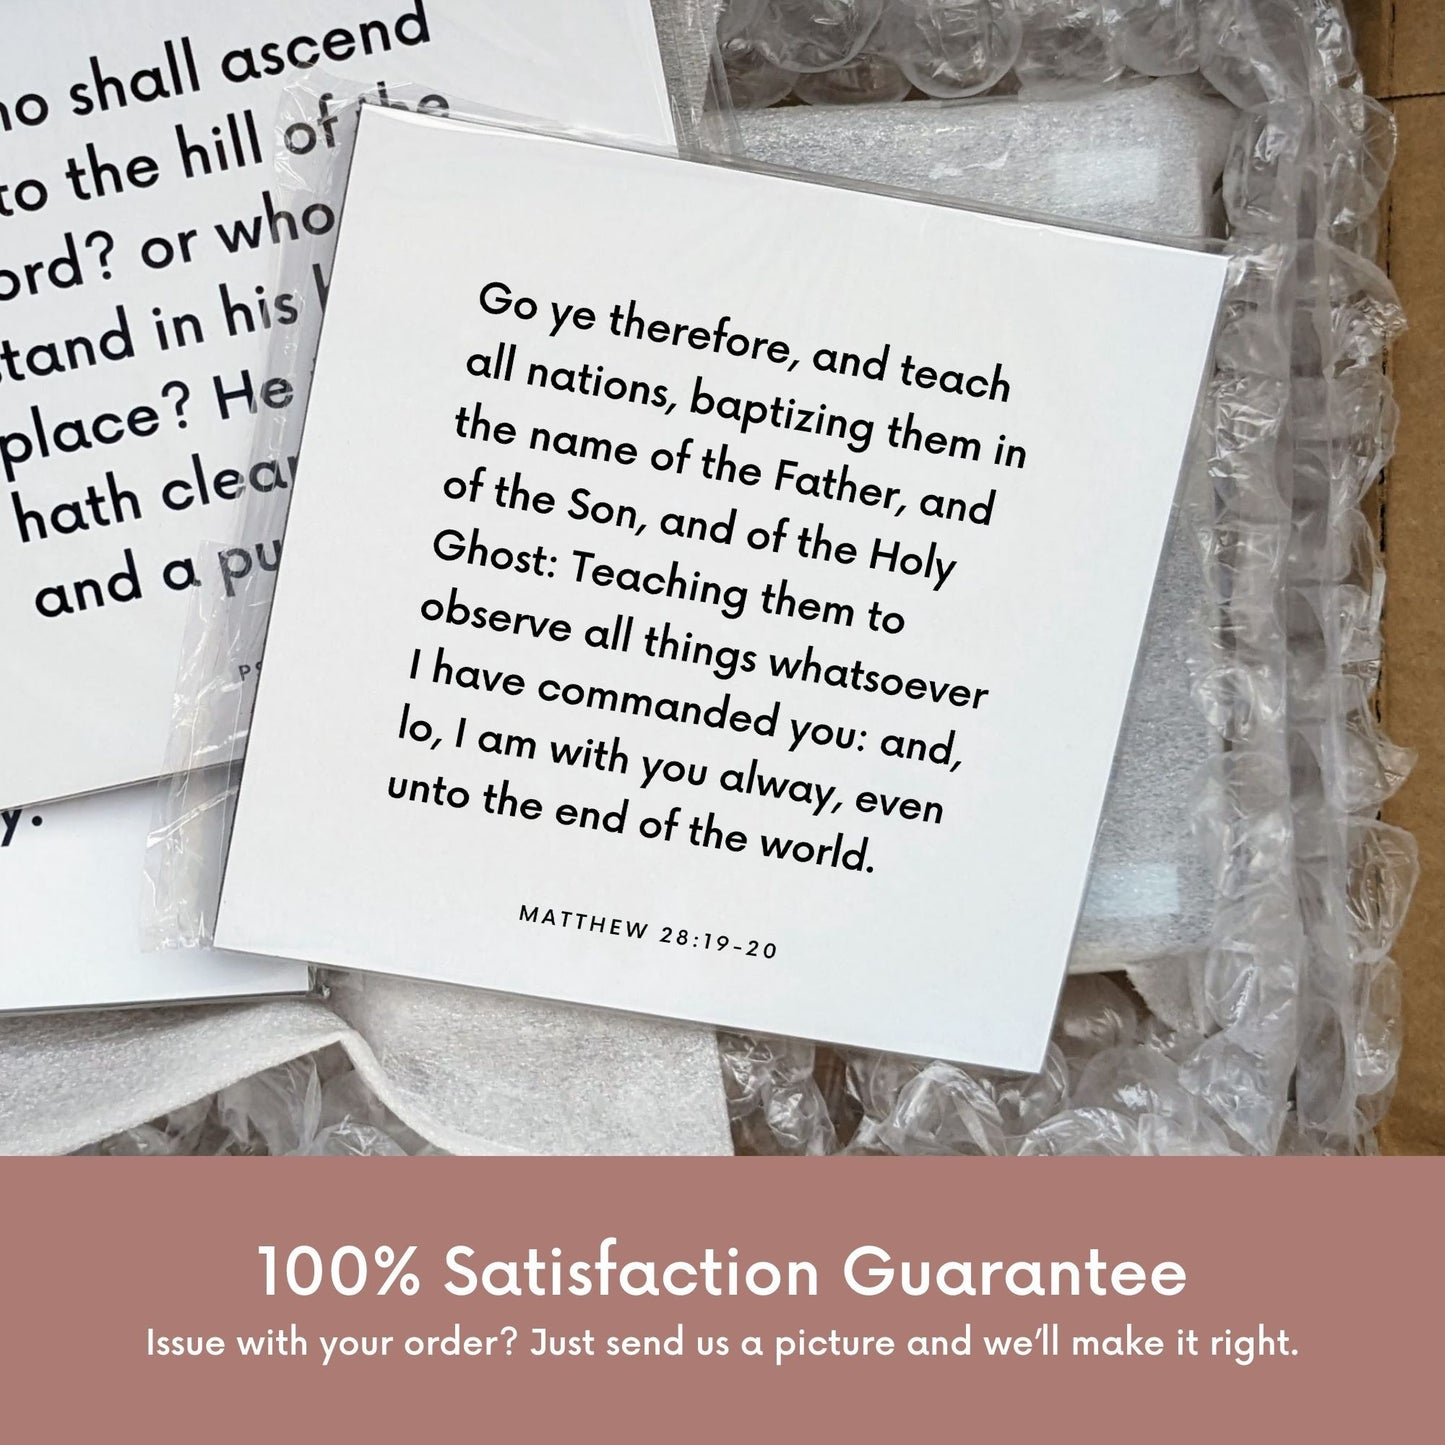 Shipping materials for scripture tile of Matthew 28:19-20 - "Go ye therefore, and teach all nations"